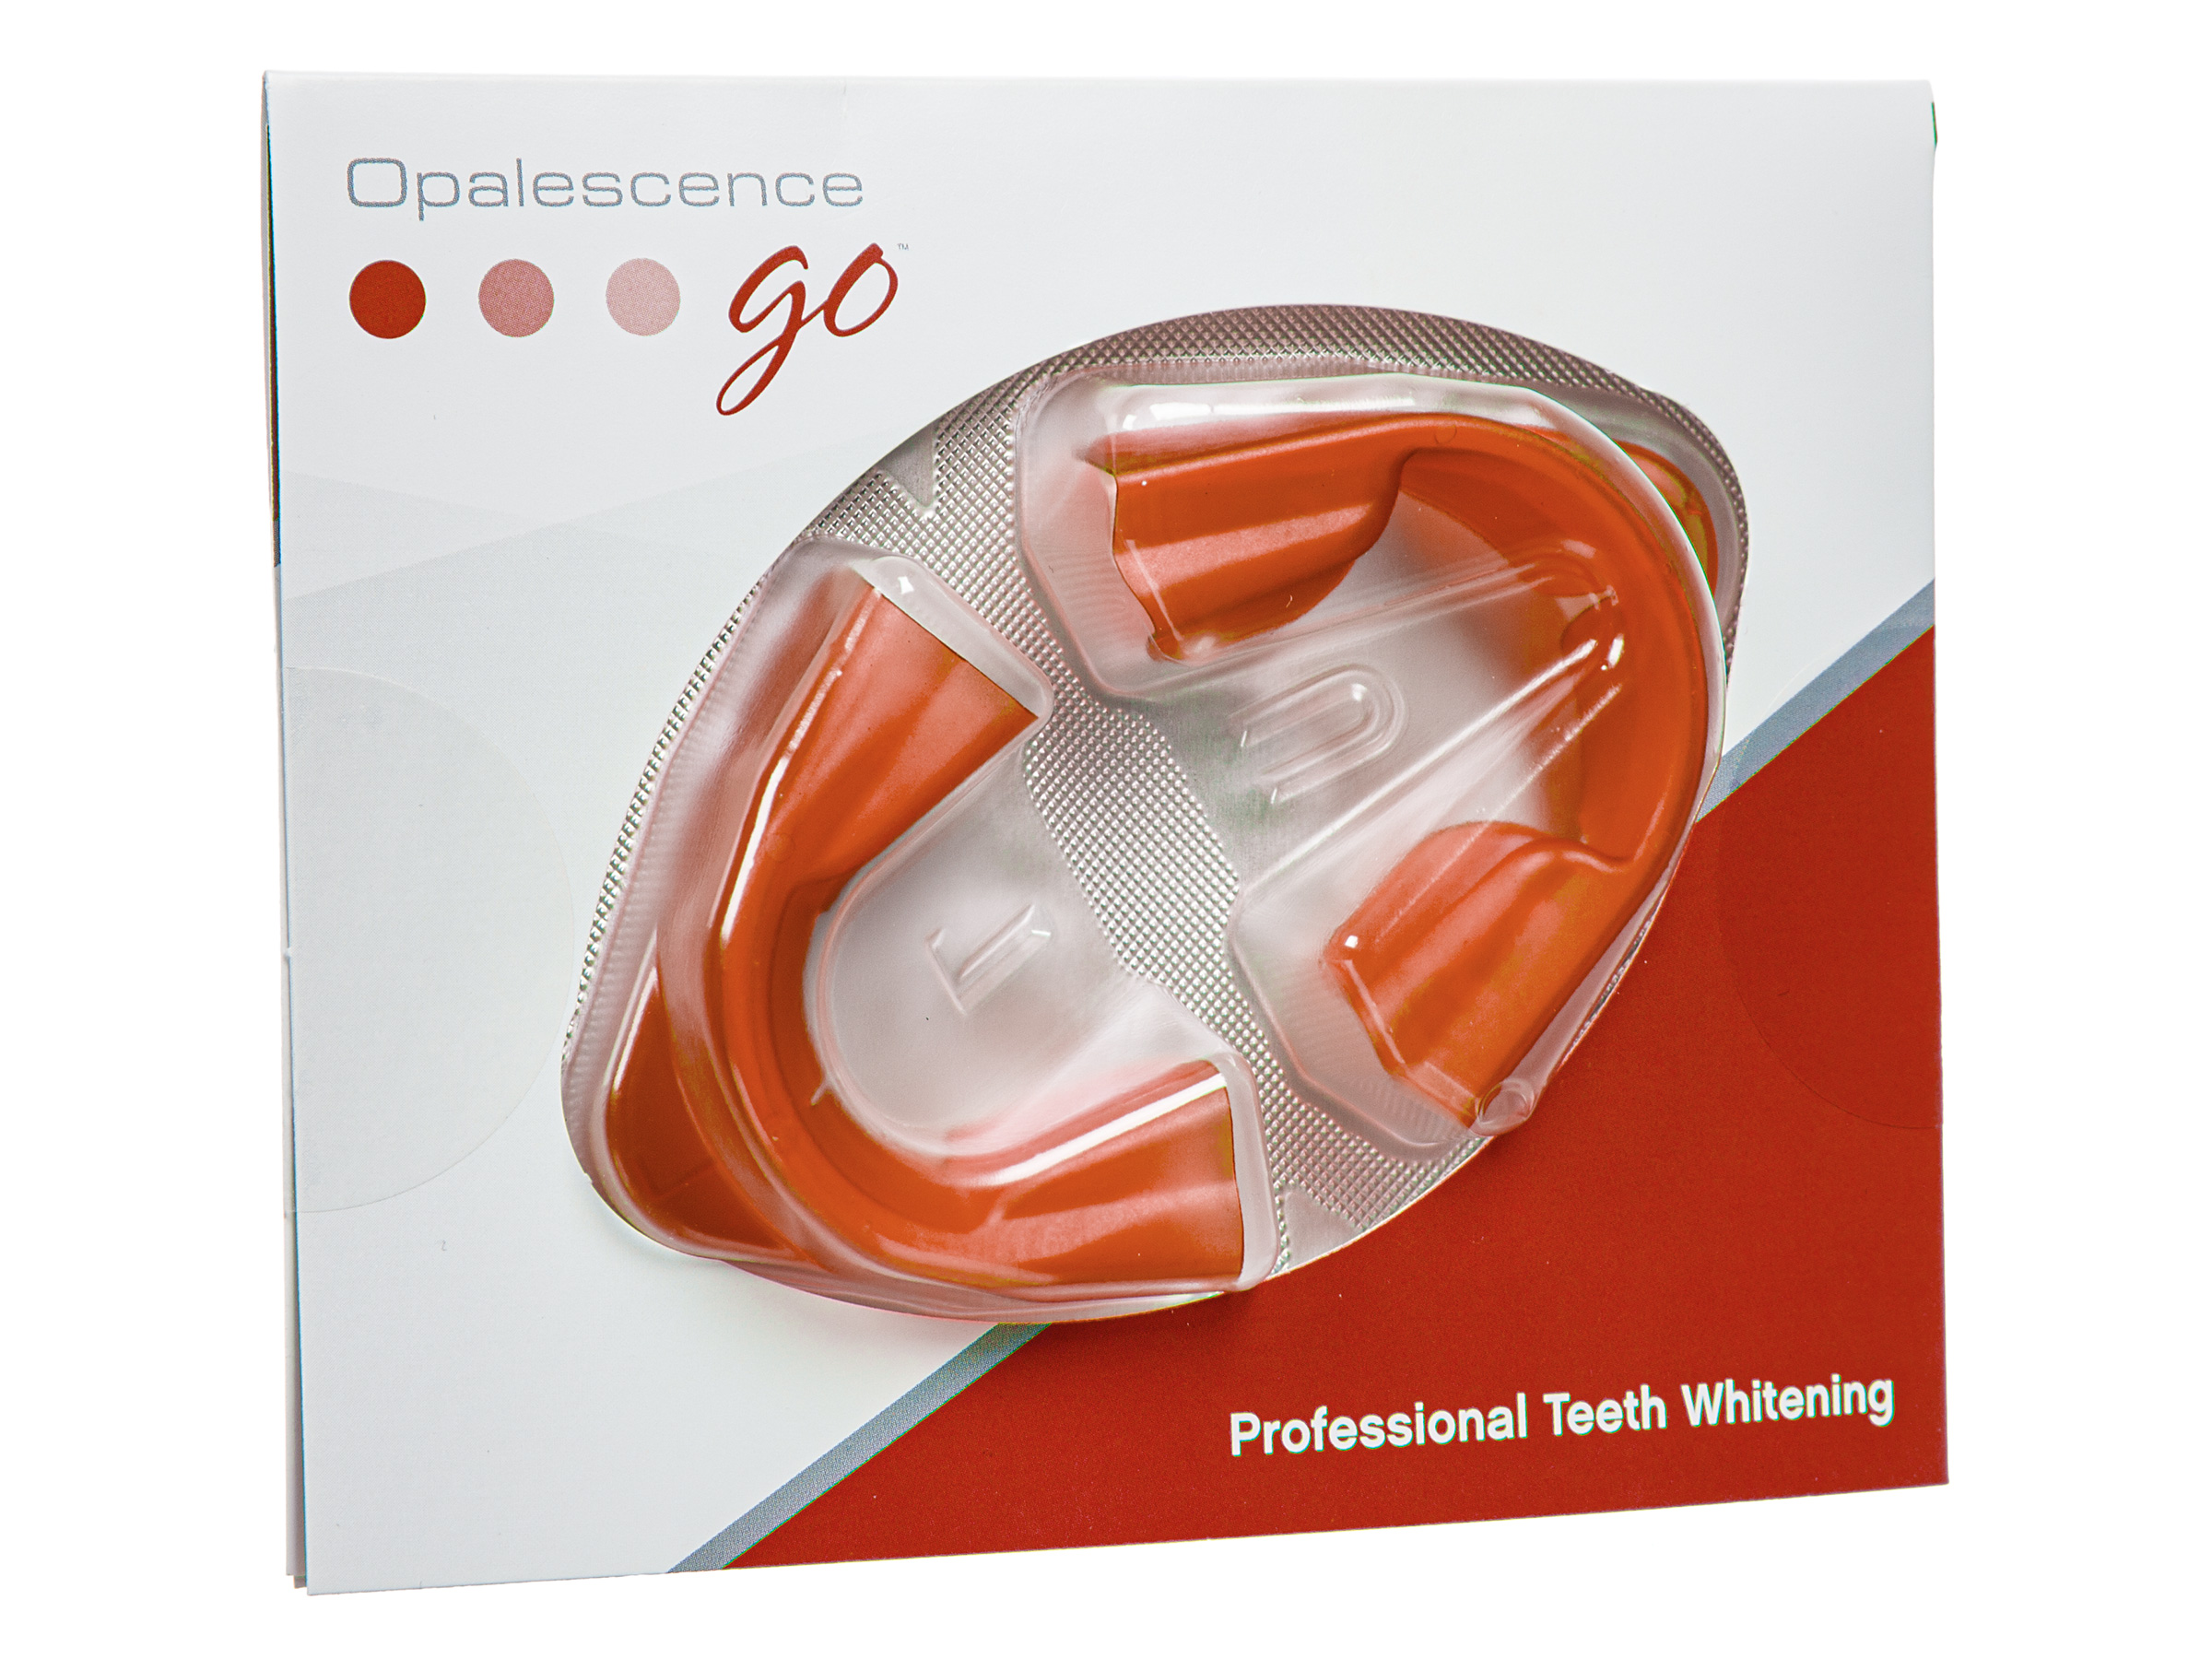 How to Use Opalescence Go Professional Teeth Whitening 